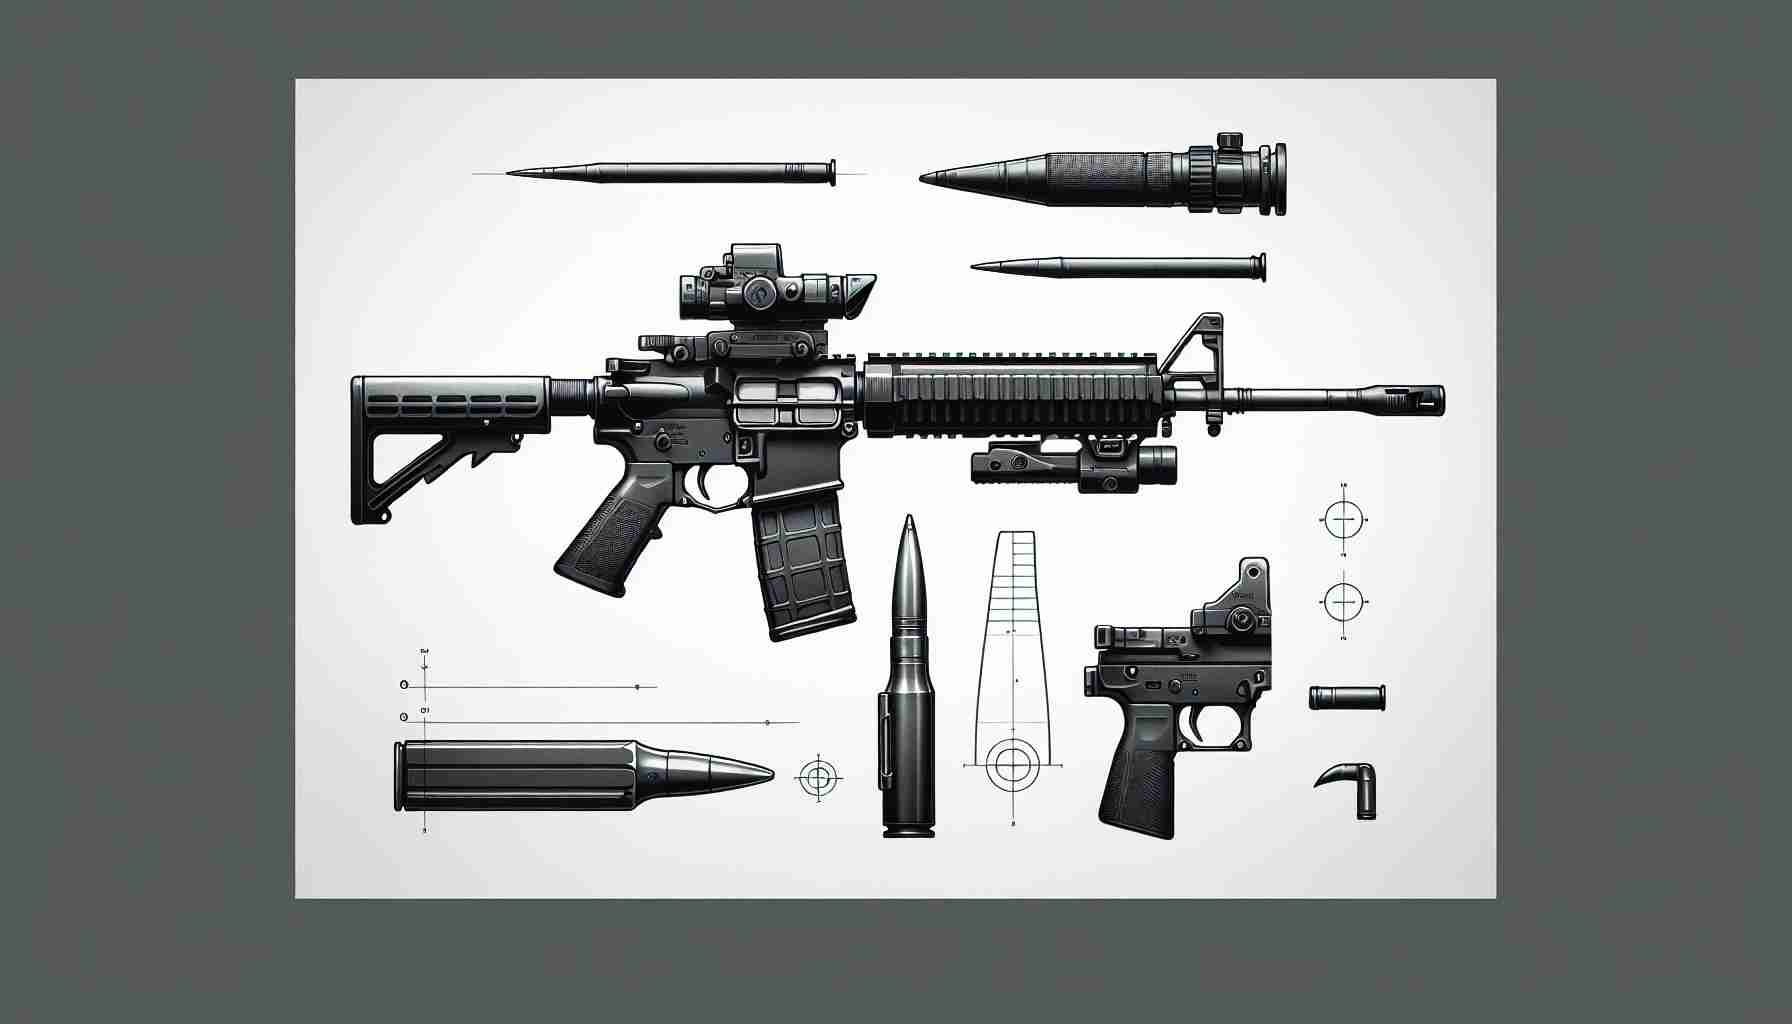 The M4 Carbine: A Standard for Modern Infantry